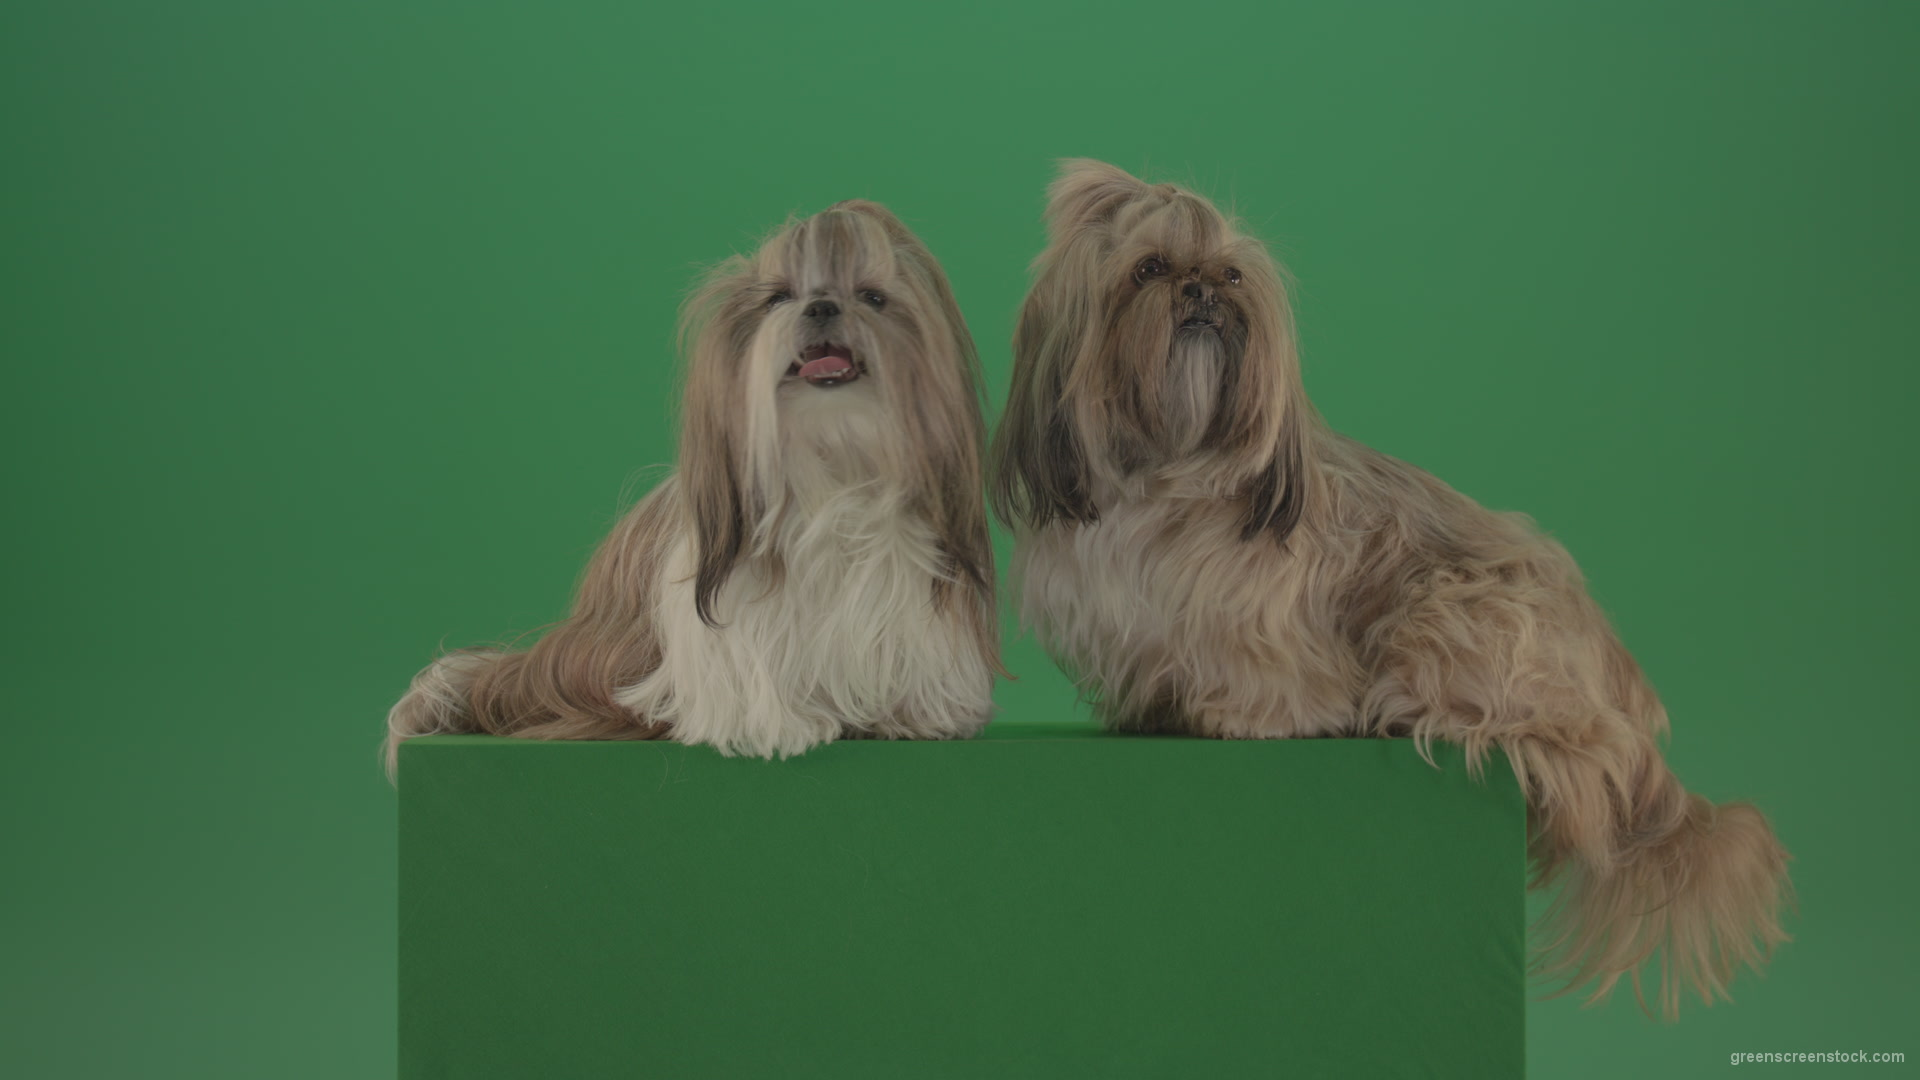 Two-cute-Shih-Tzu-Small-toy-dogs-yawling-and-sitting-on-green-screen-4K_002 Green Screen Stock